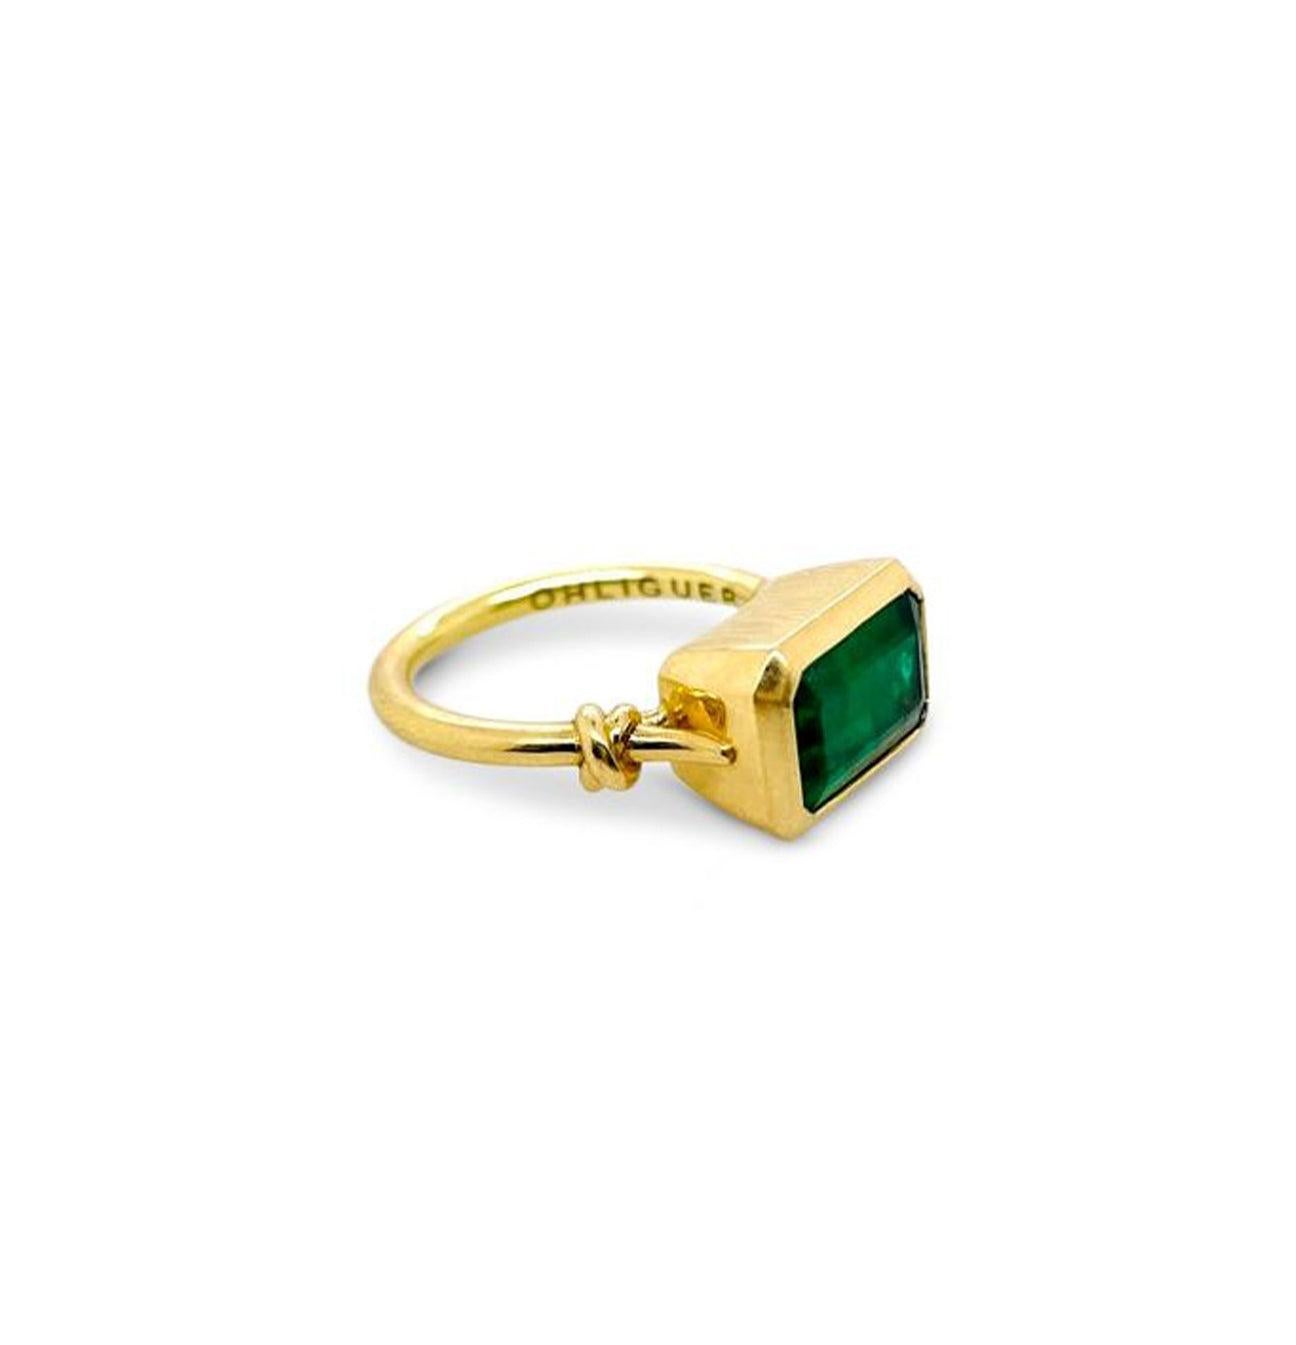 2.50ct Zambian emerald 10.5 x 7mm

18ct yellow gold

size i

Comes with valuation for $17,325

Ready to ship! 
